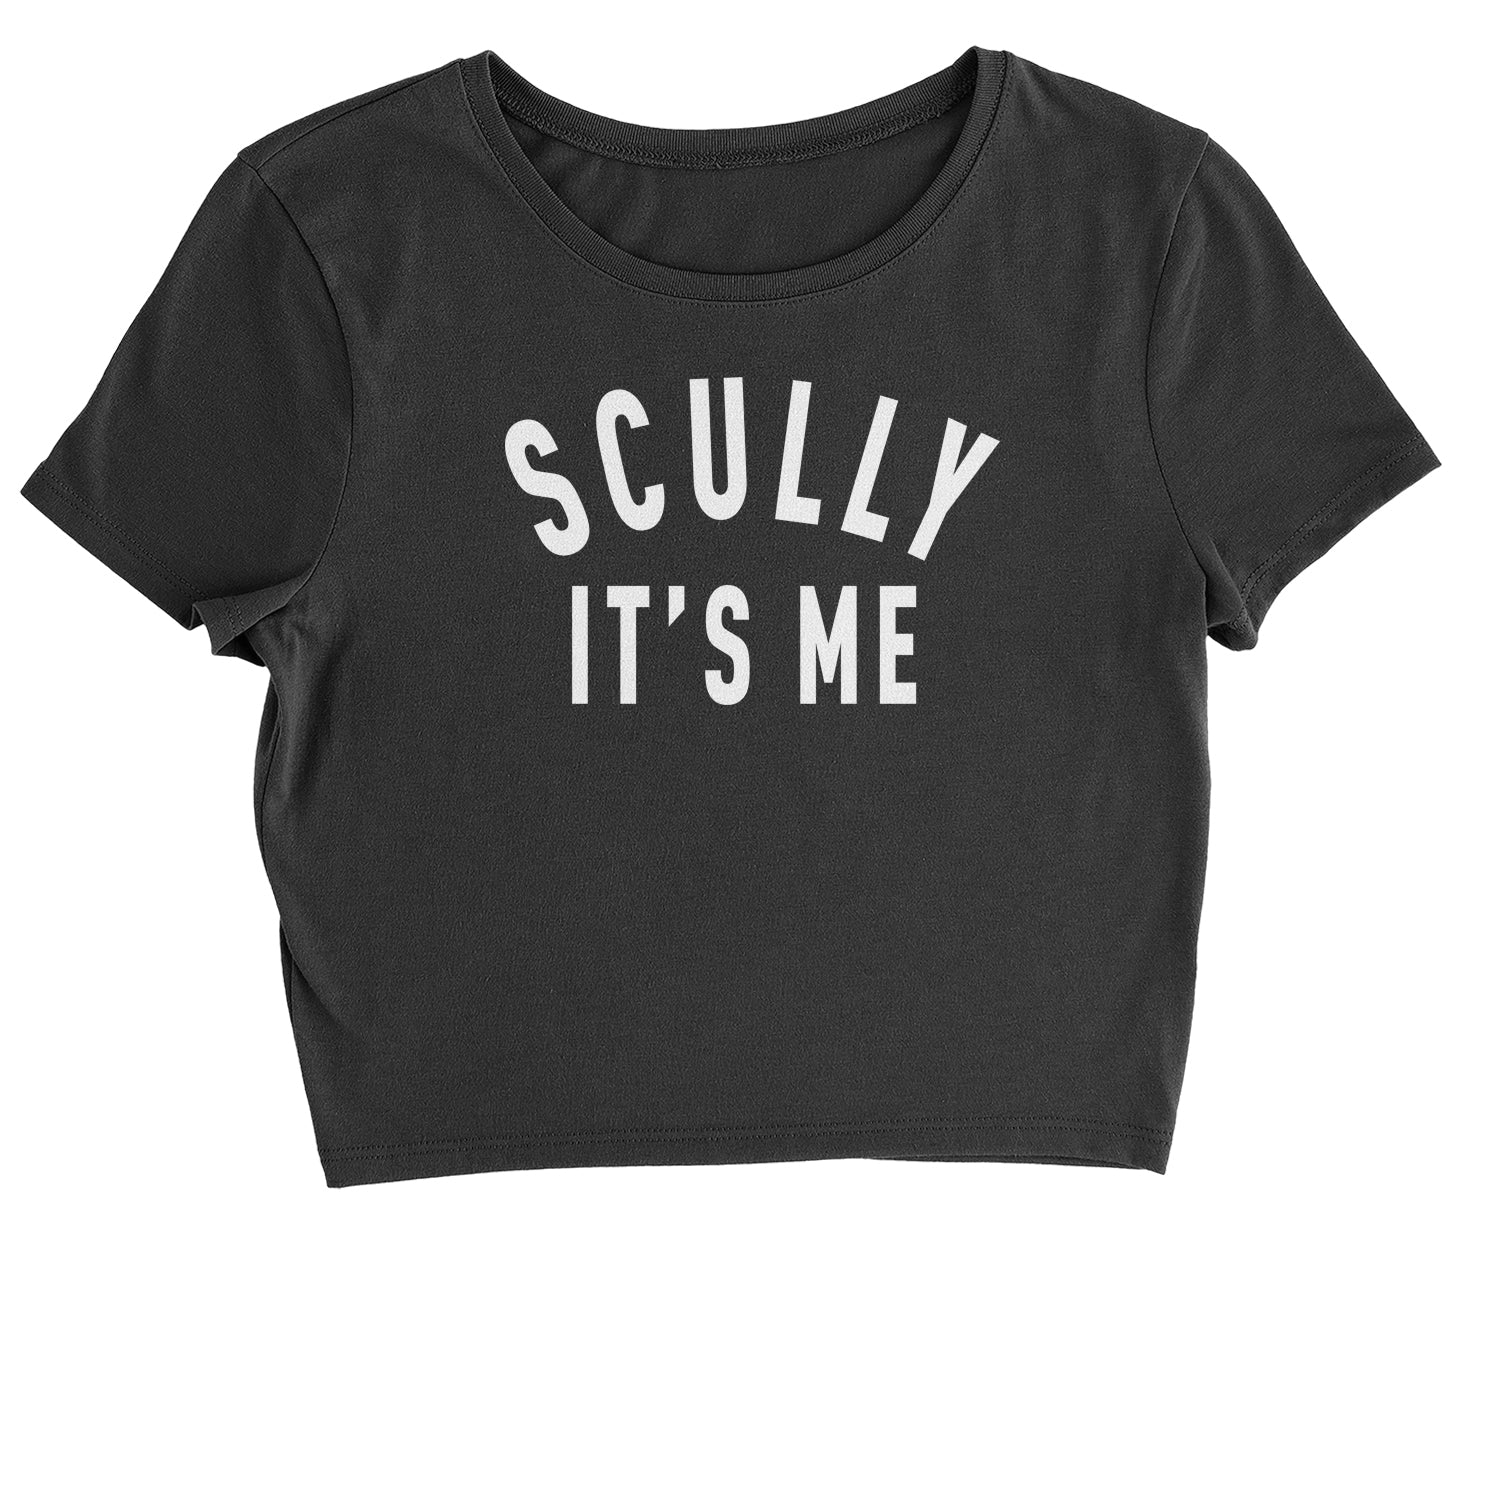 Scully, It's Me Cropped T-Shirt #expressiontees by Expression Tees